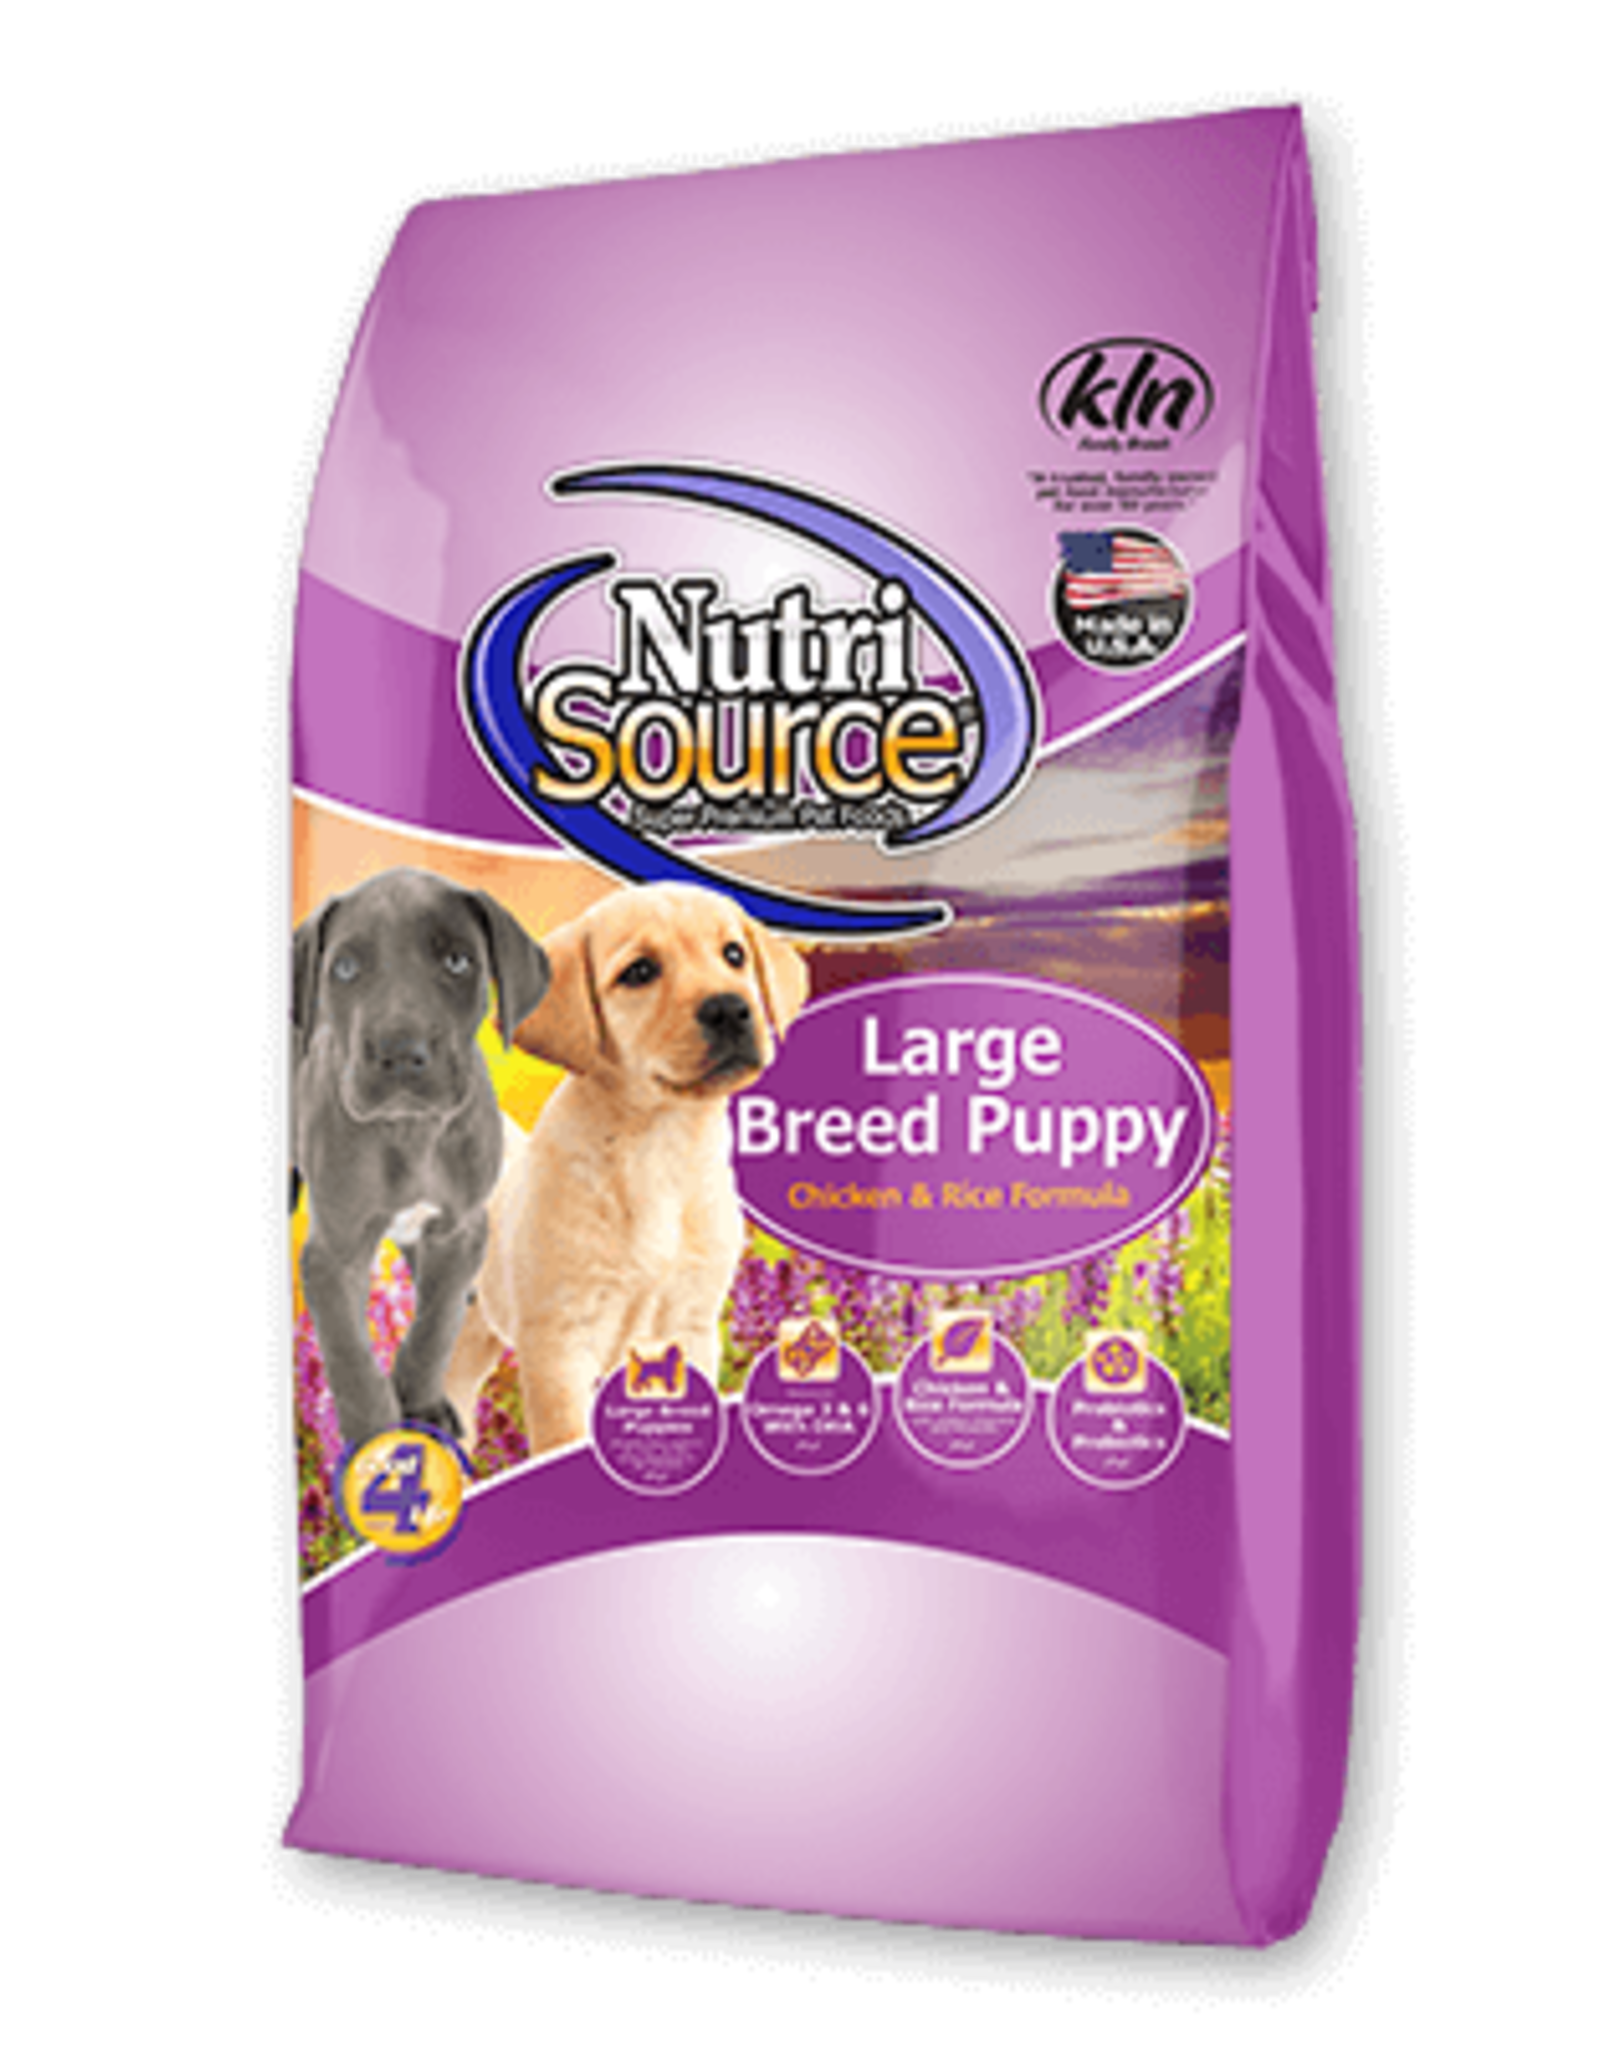 KLN Nutrisource: Large Breed Puppy Chicken & Rice 30lb